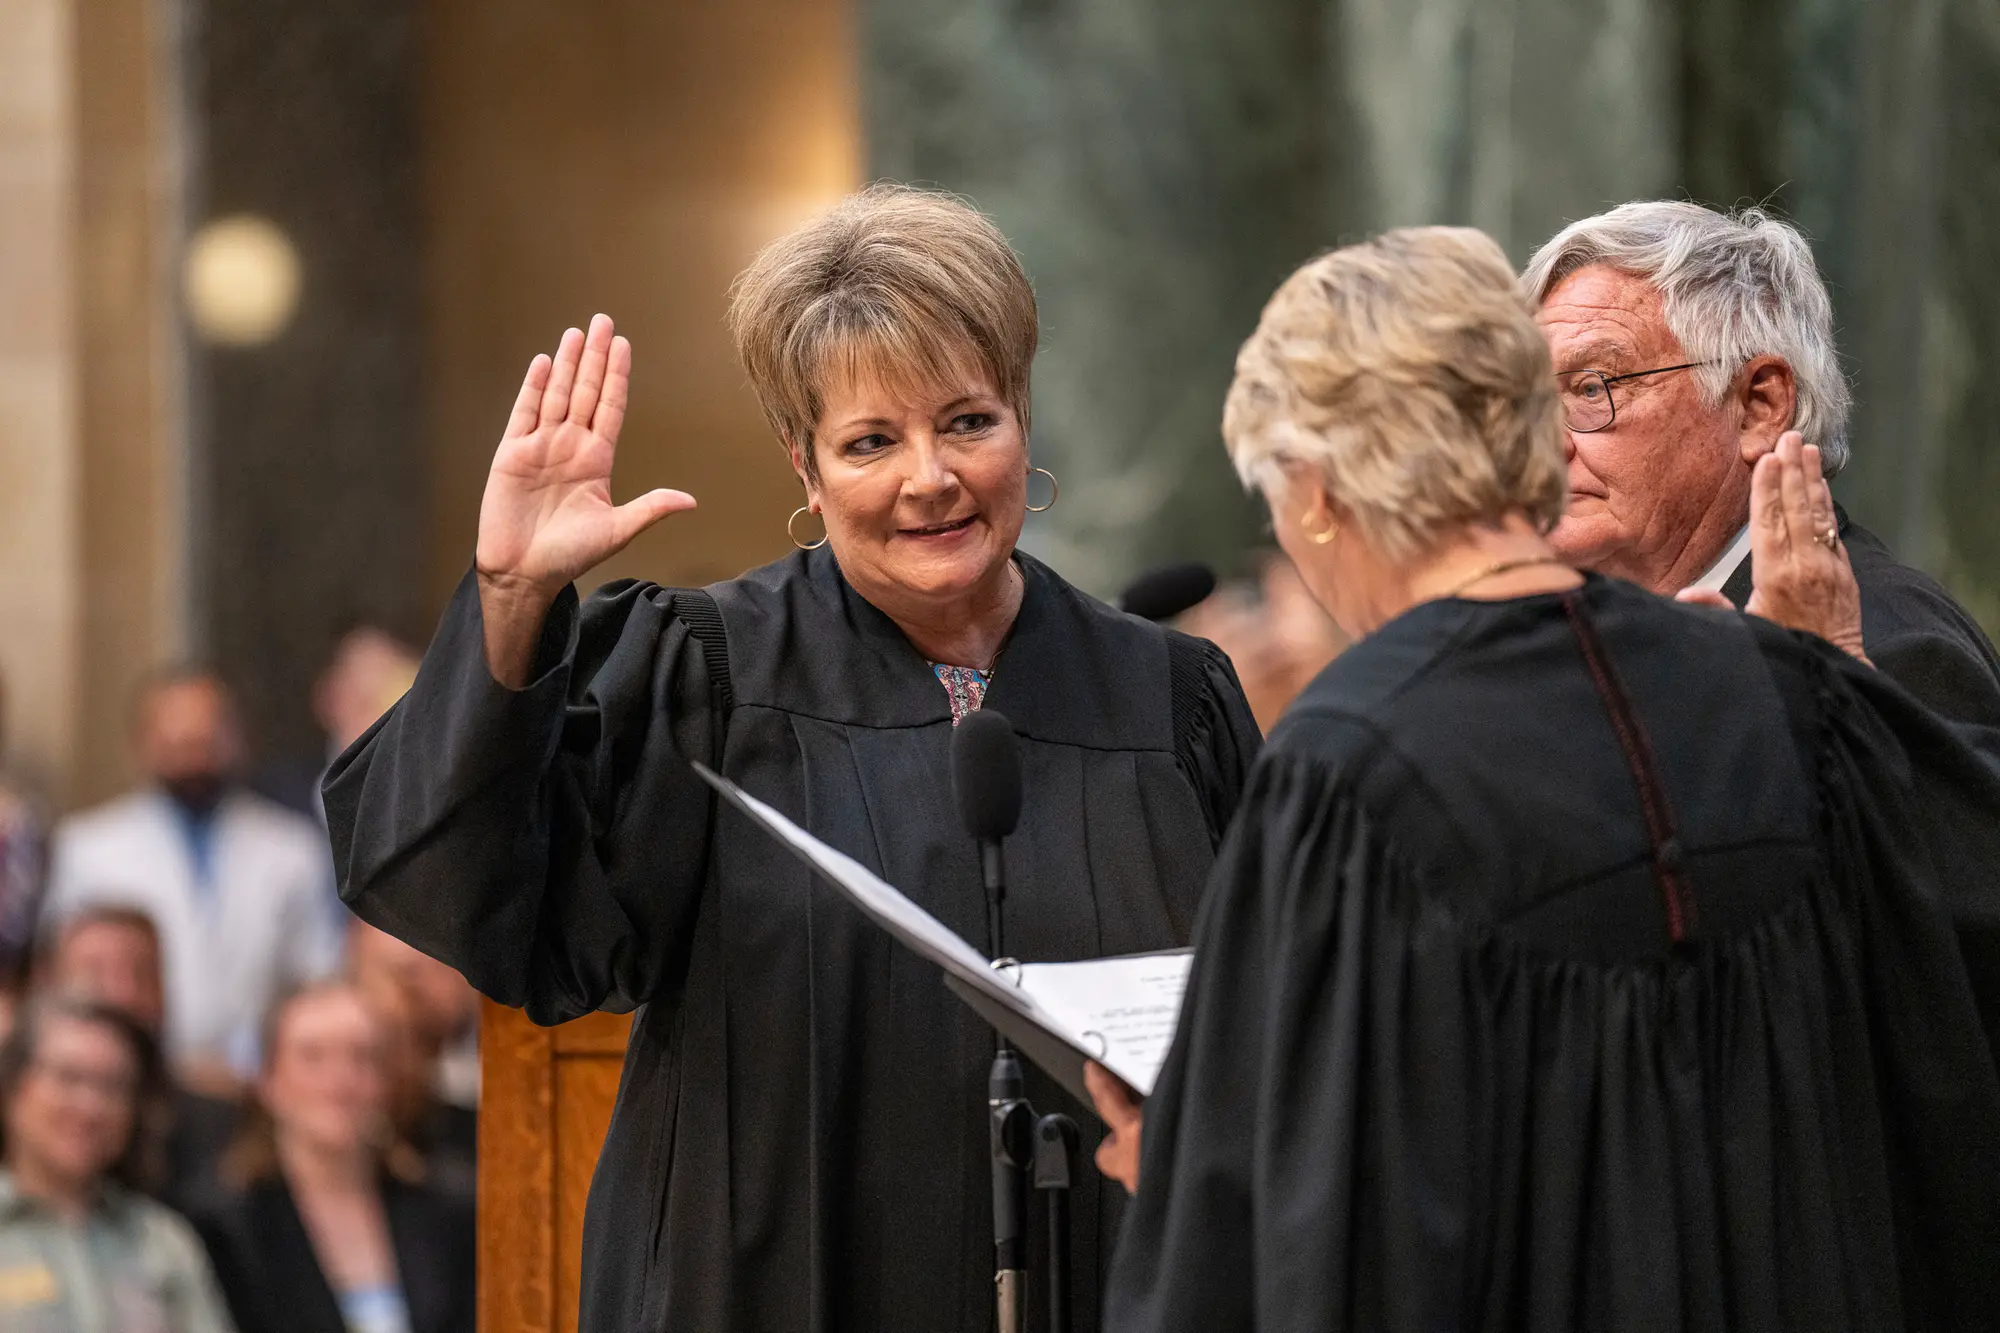 Janet Protasiewicz is raising her hand being sworn in as a State Supreme Court Justice at the Wisconsin State Capitol